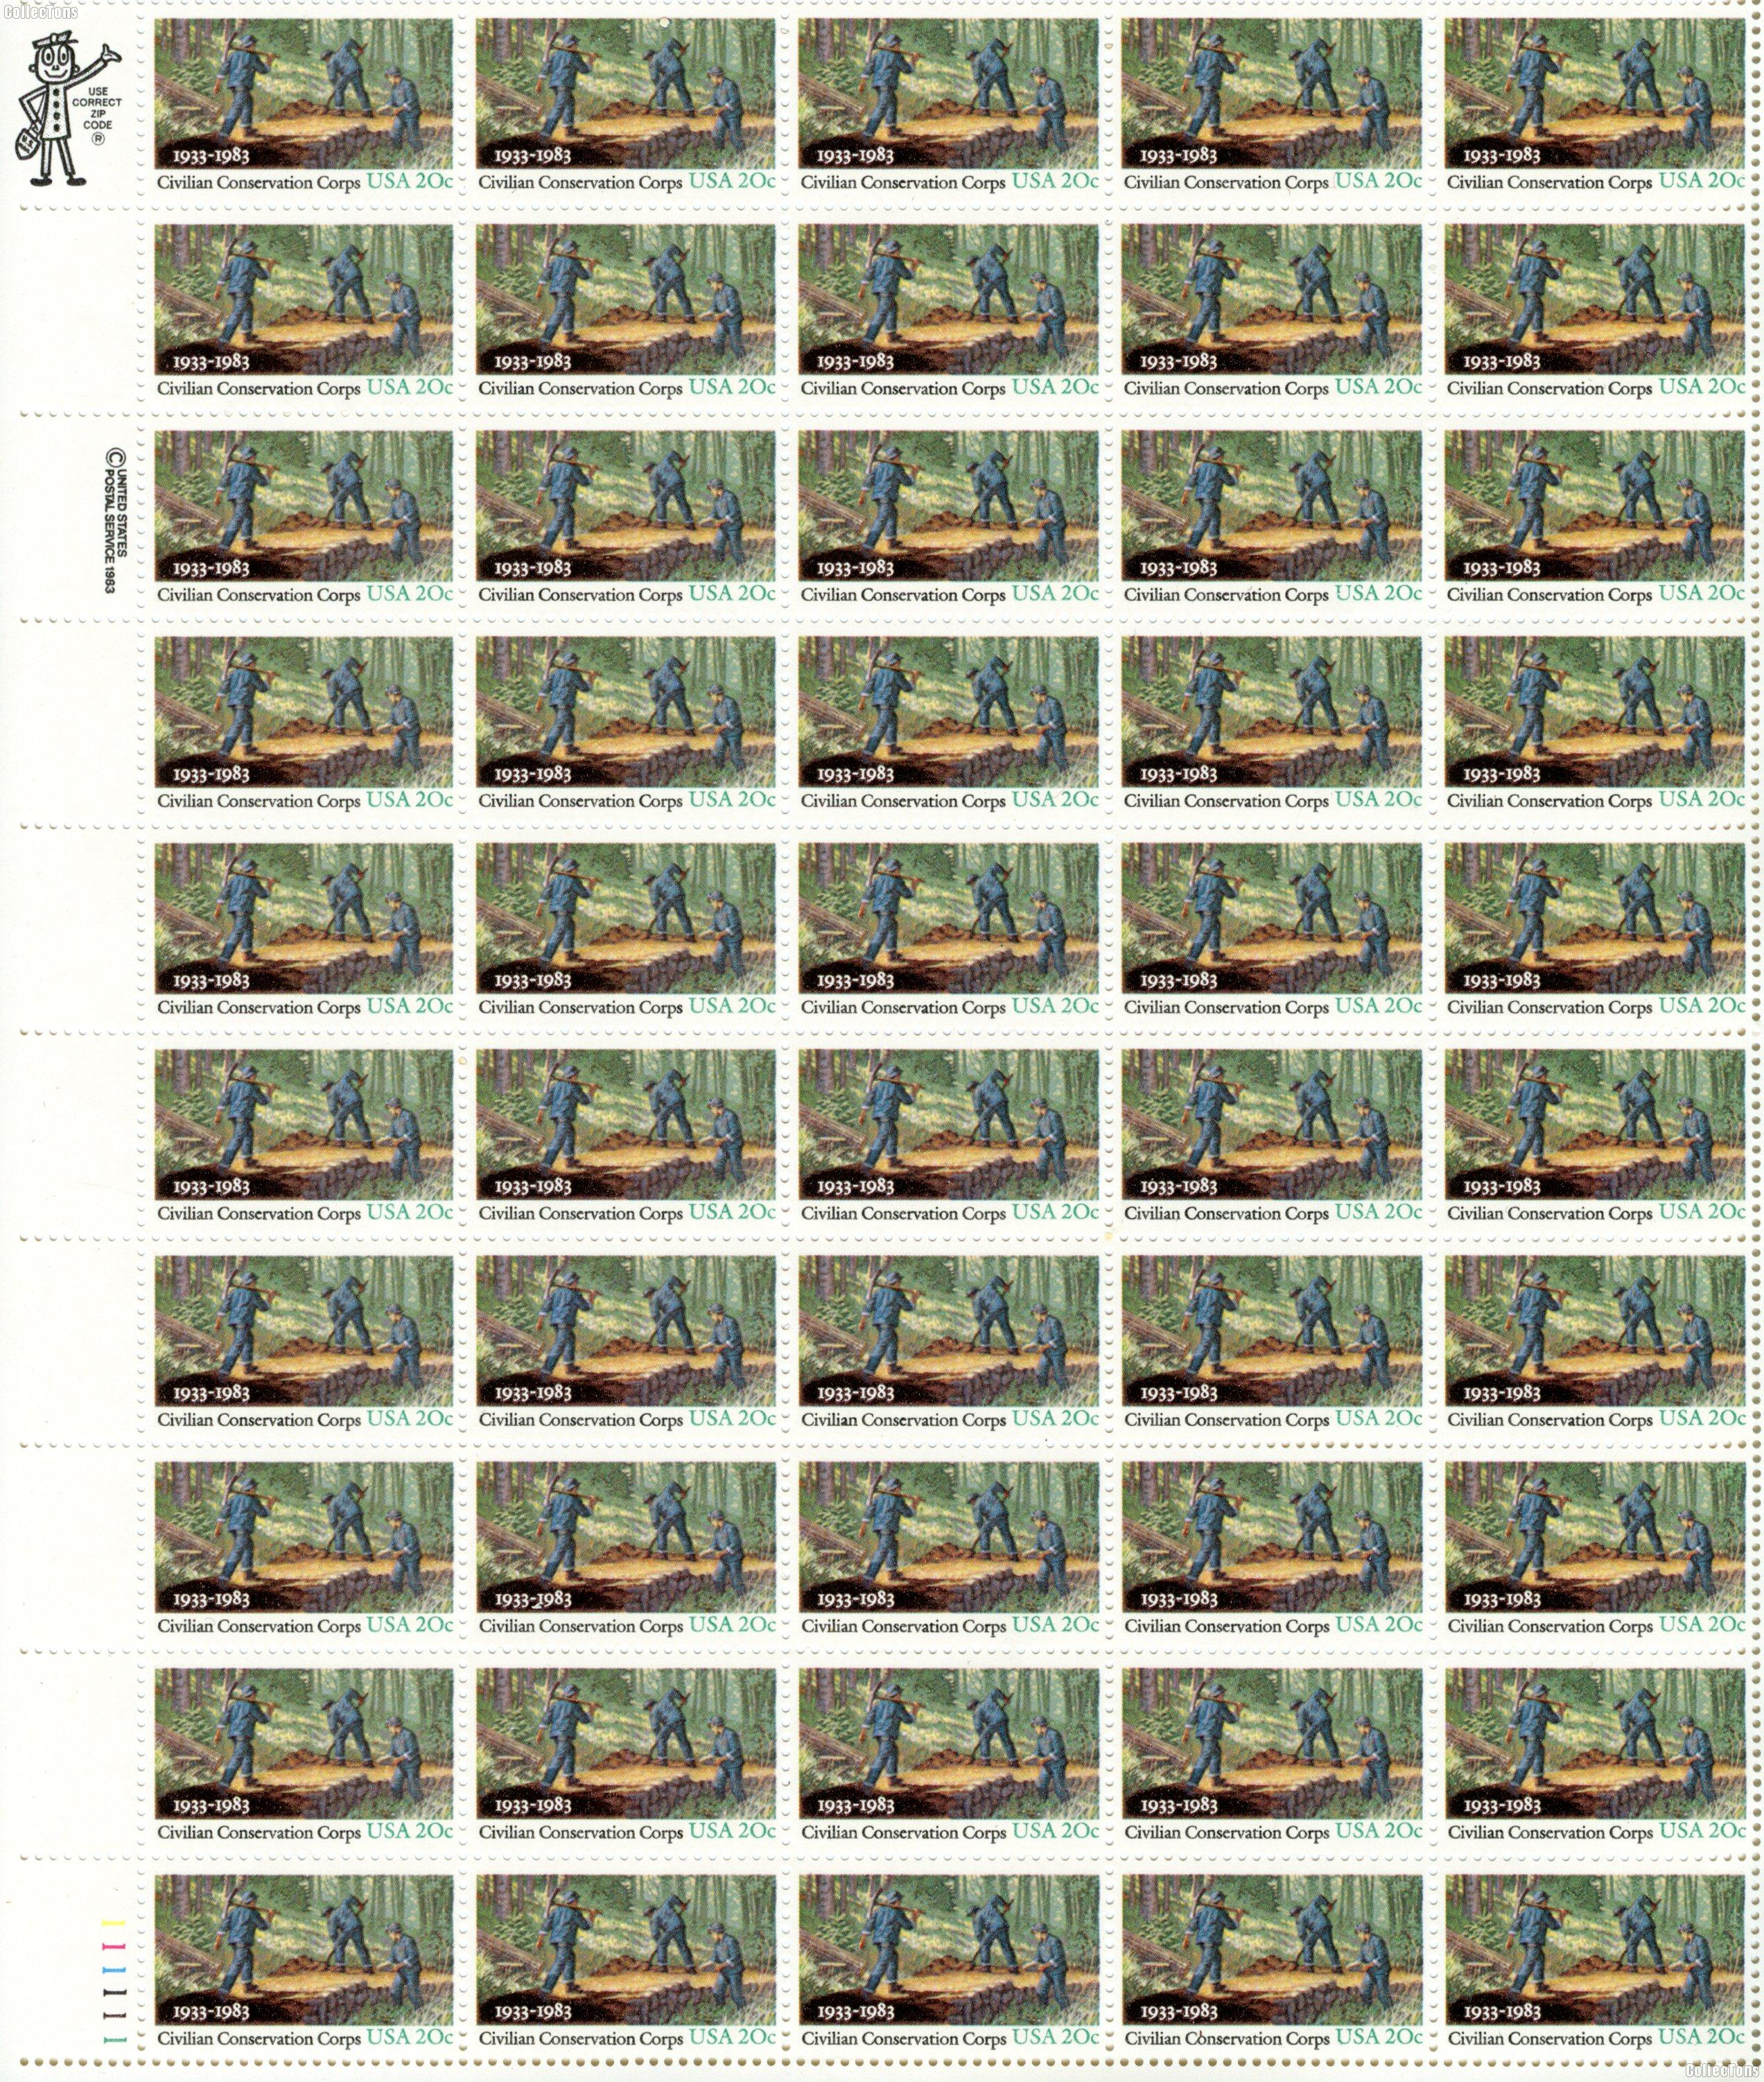 1983 Civilian Conservation Corps 20 Cent US Postage Stamp MNH Sheet of 50 Scott #2037